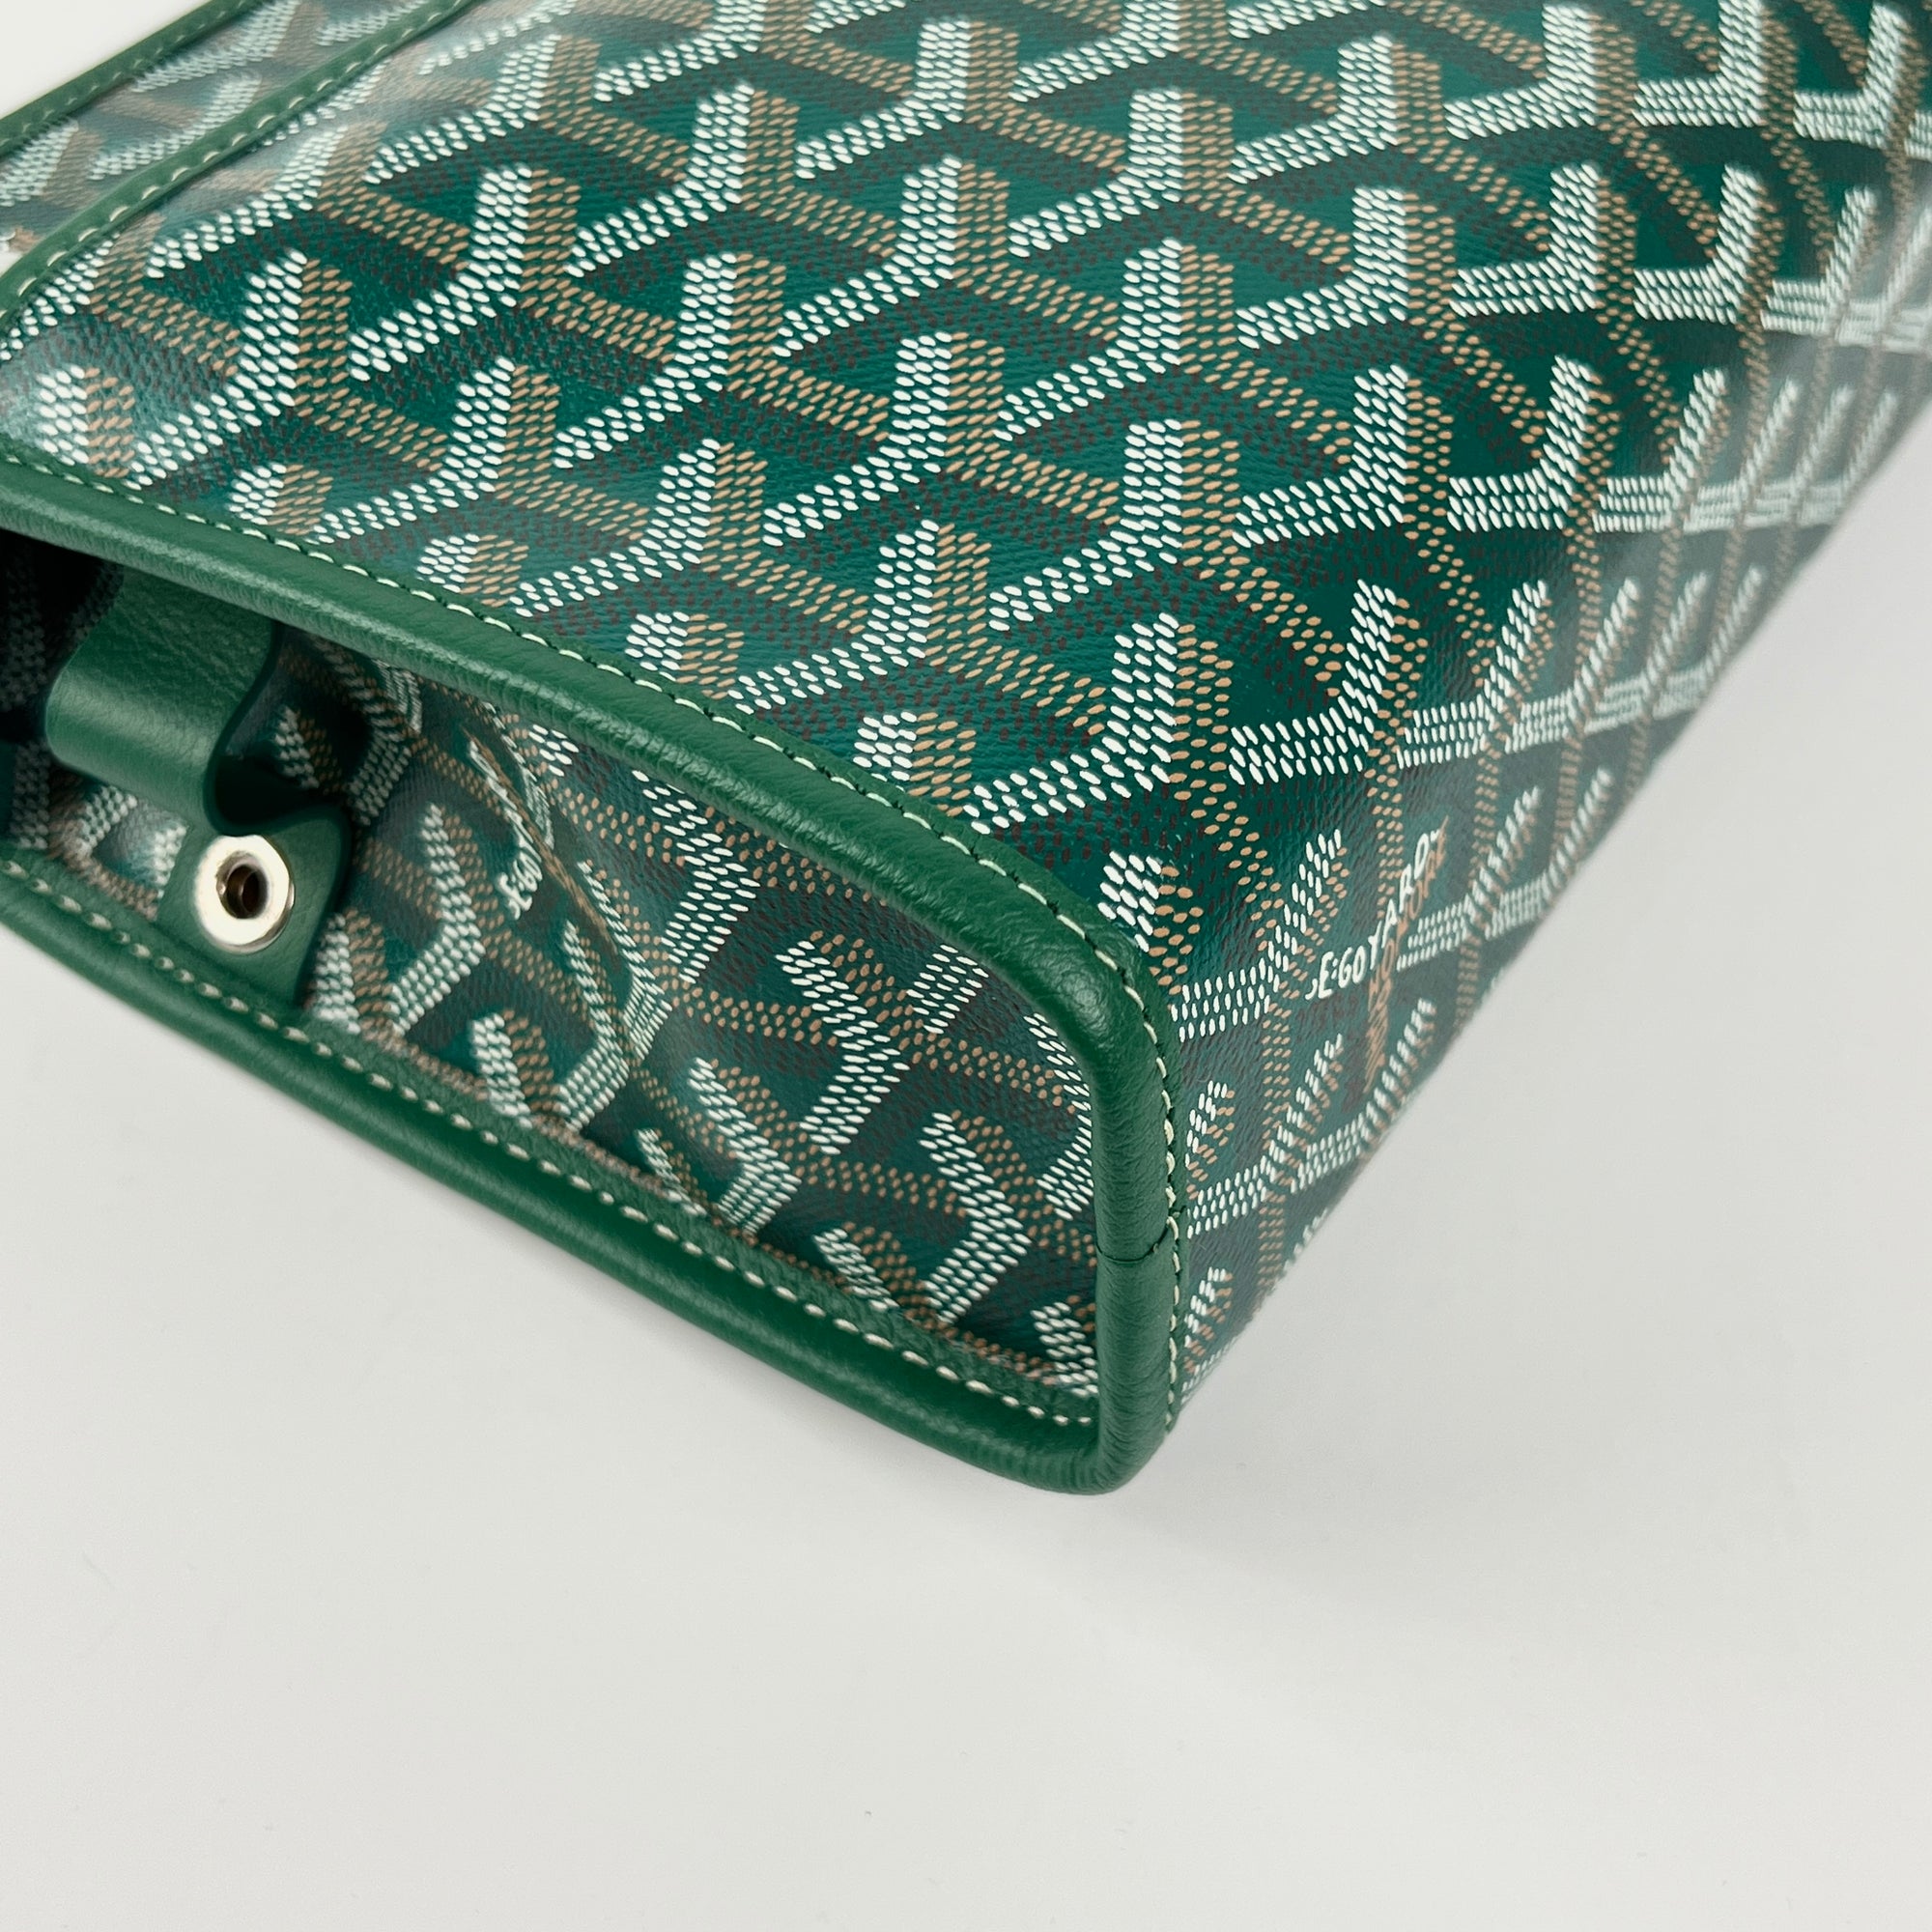 2021 New Style Goyard Jouvence Toiletry Pouch GM Top Quality Copy Green